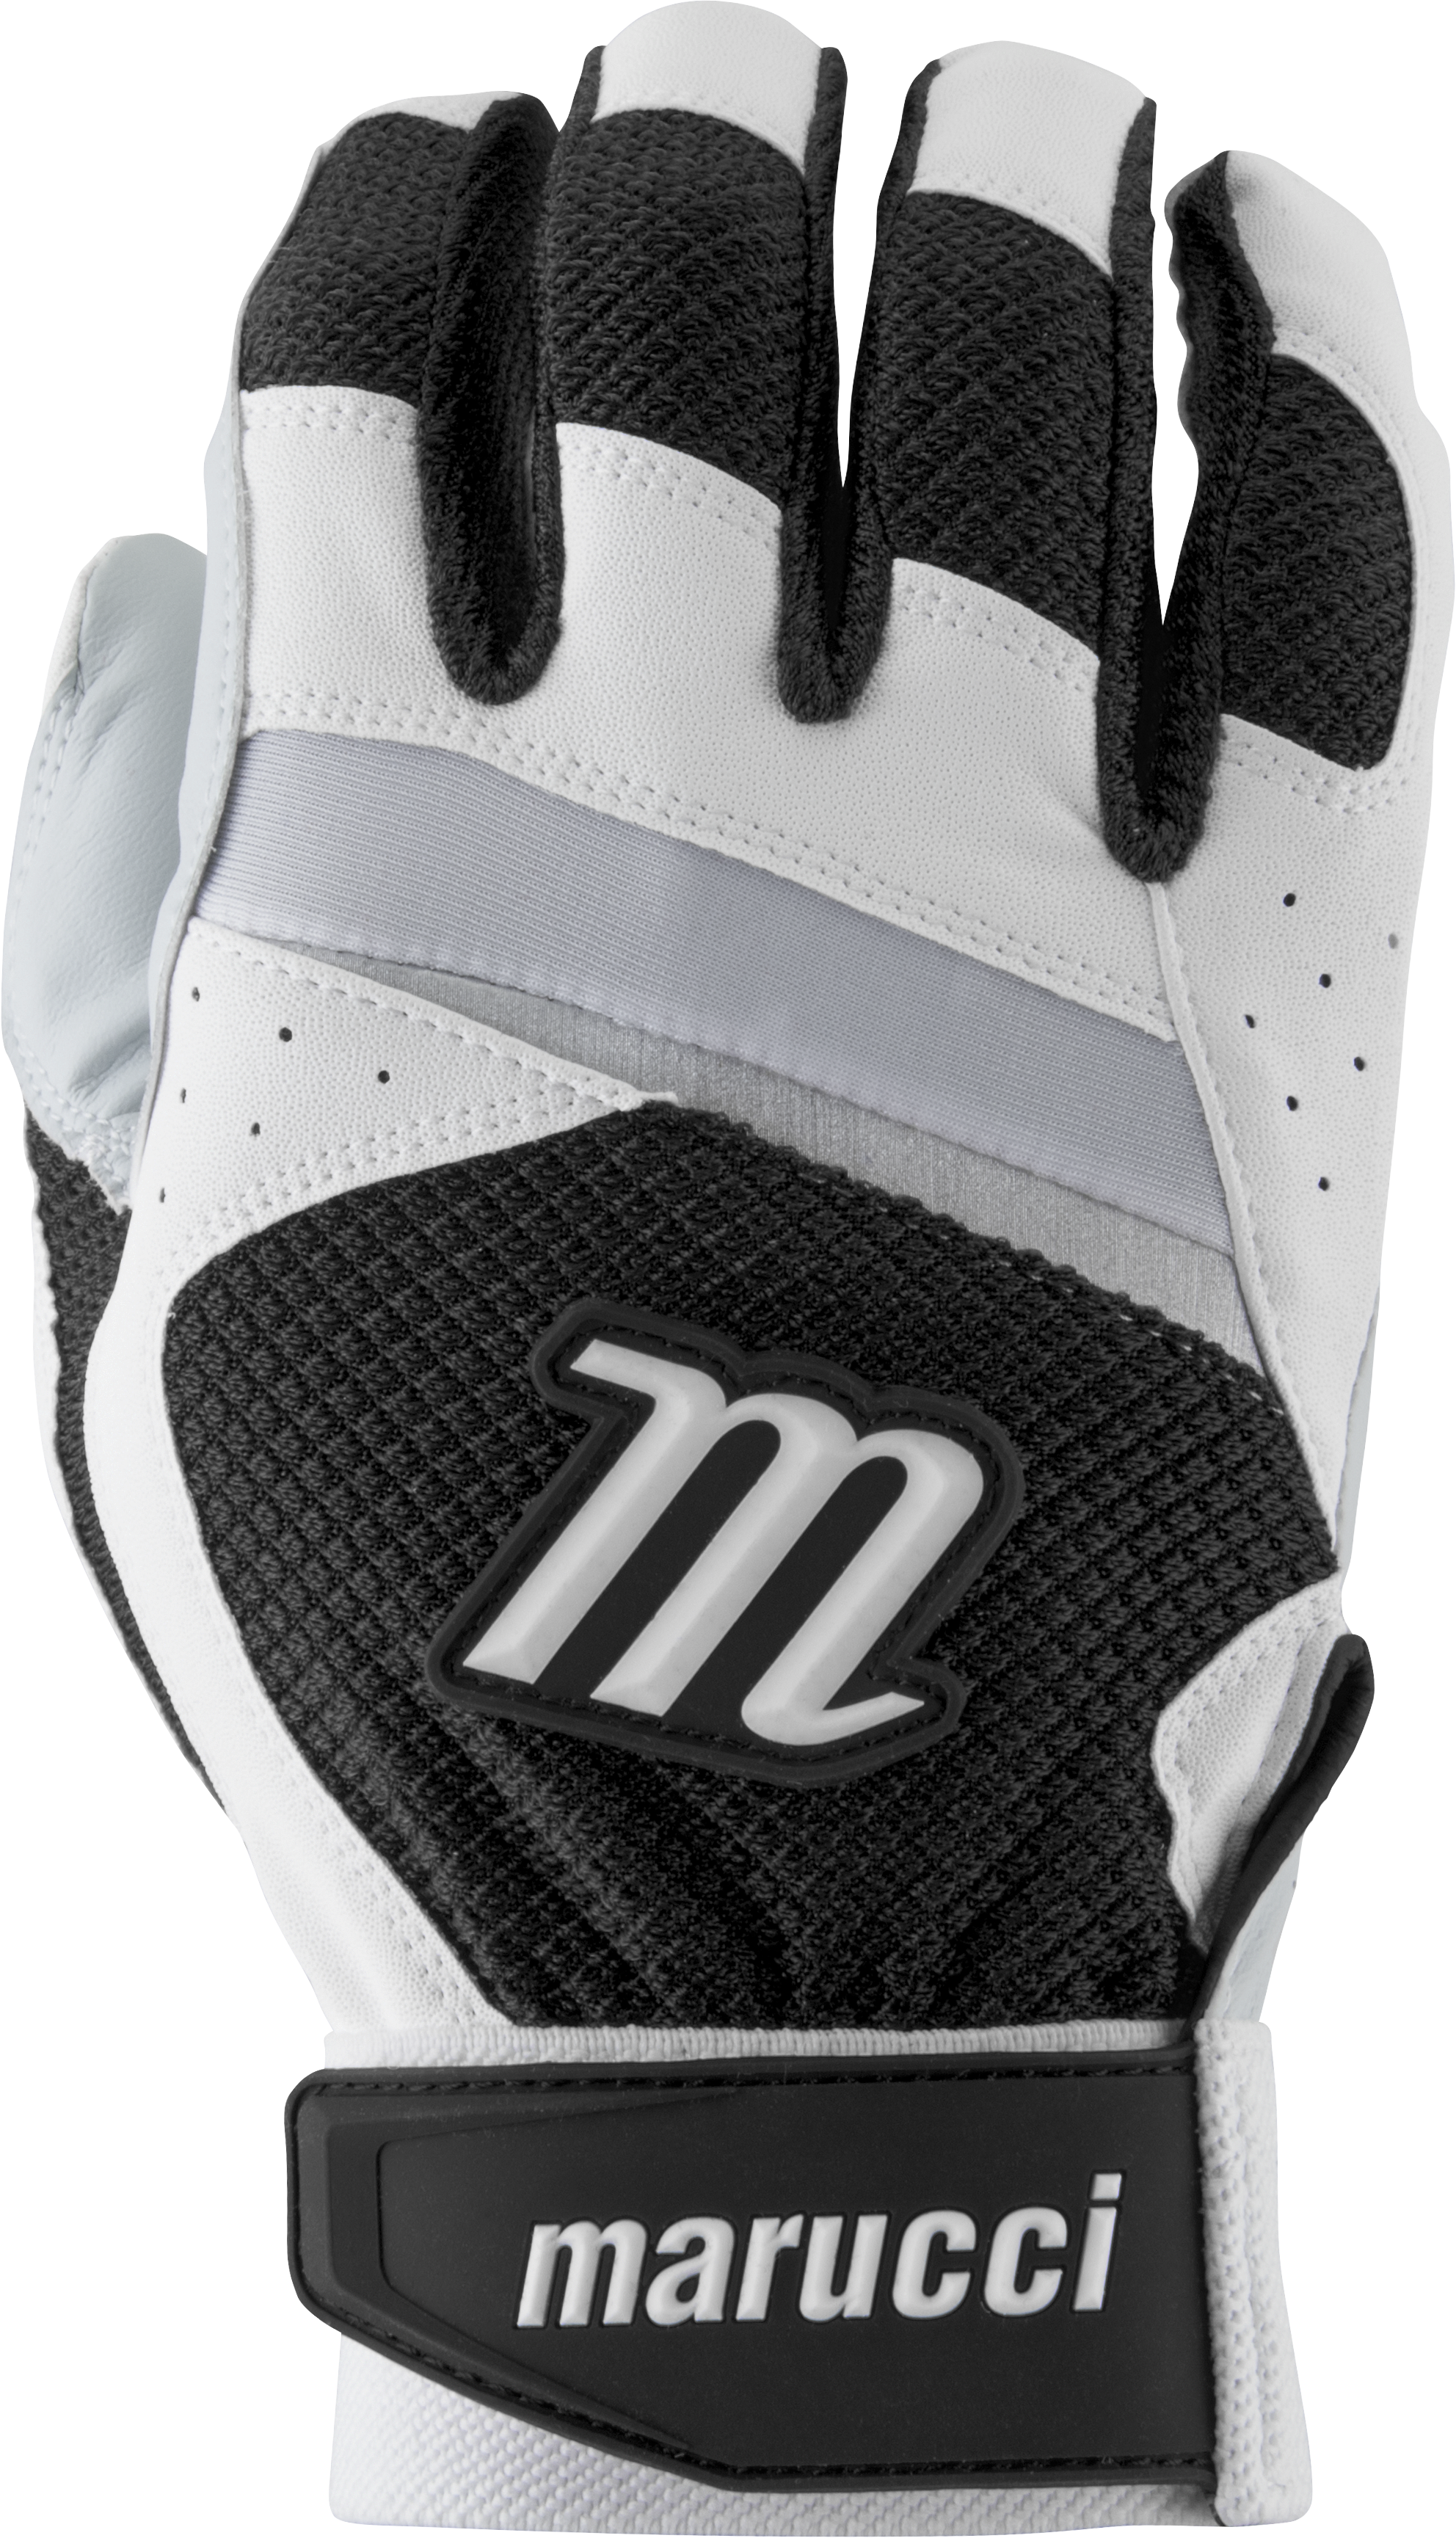 marucci-code-adult-batting-gloves-1-pair-white-black-adult-x-large MBGCD-WBK-AXL Marucci 849817095997 2019 Model MBGCD-W/BK Consistency And Craftsmanship Commitment To Quality And Understanding